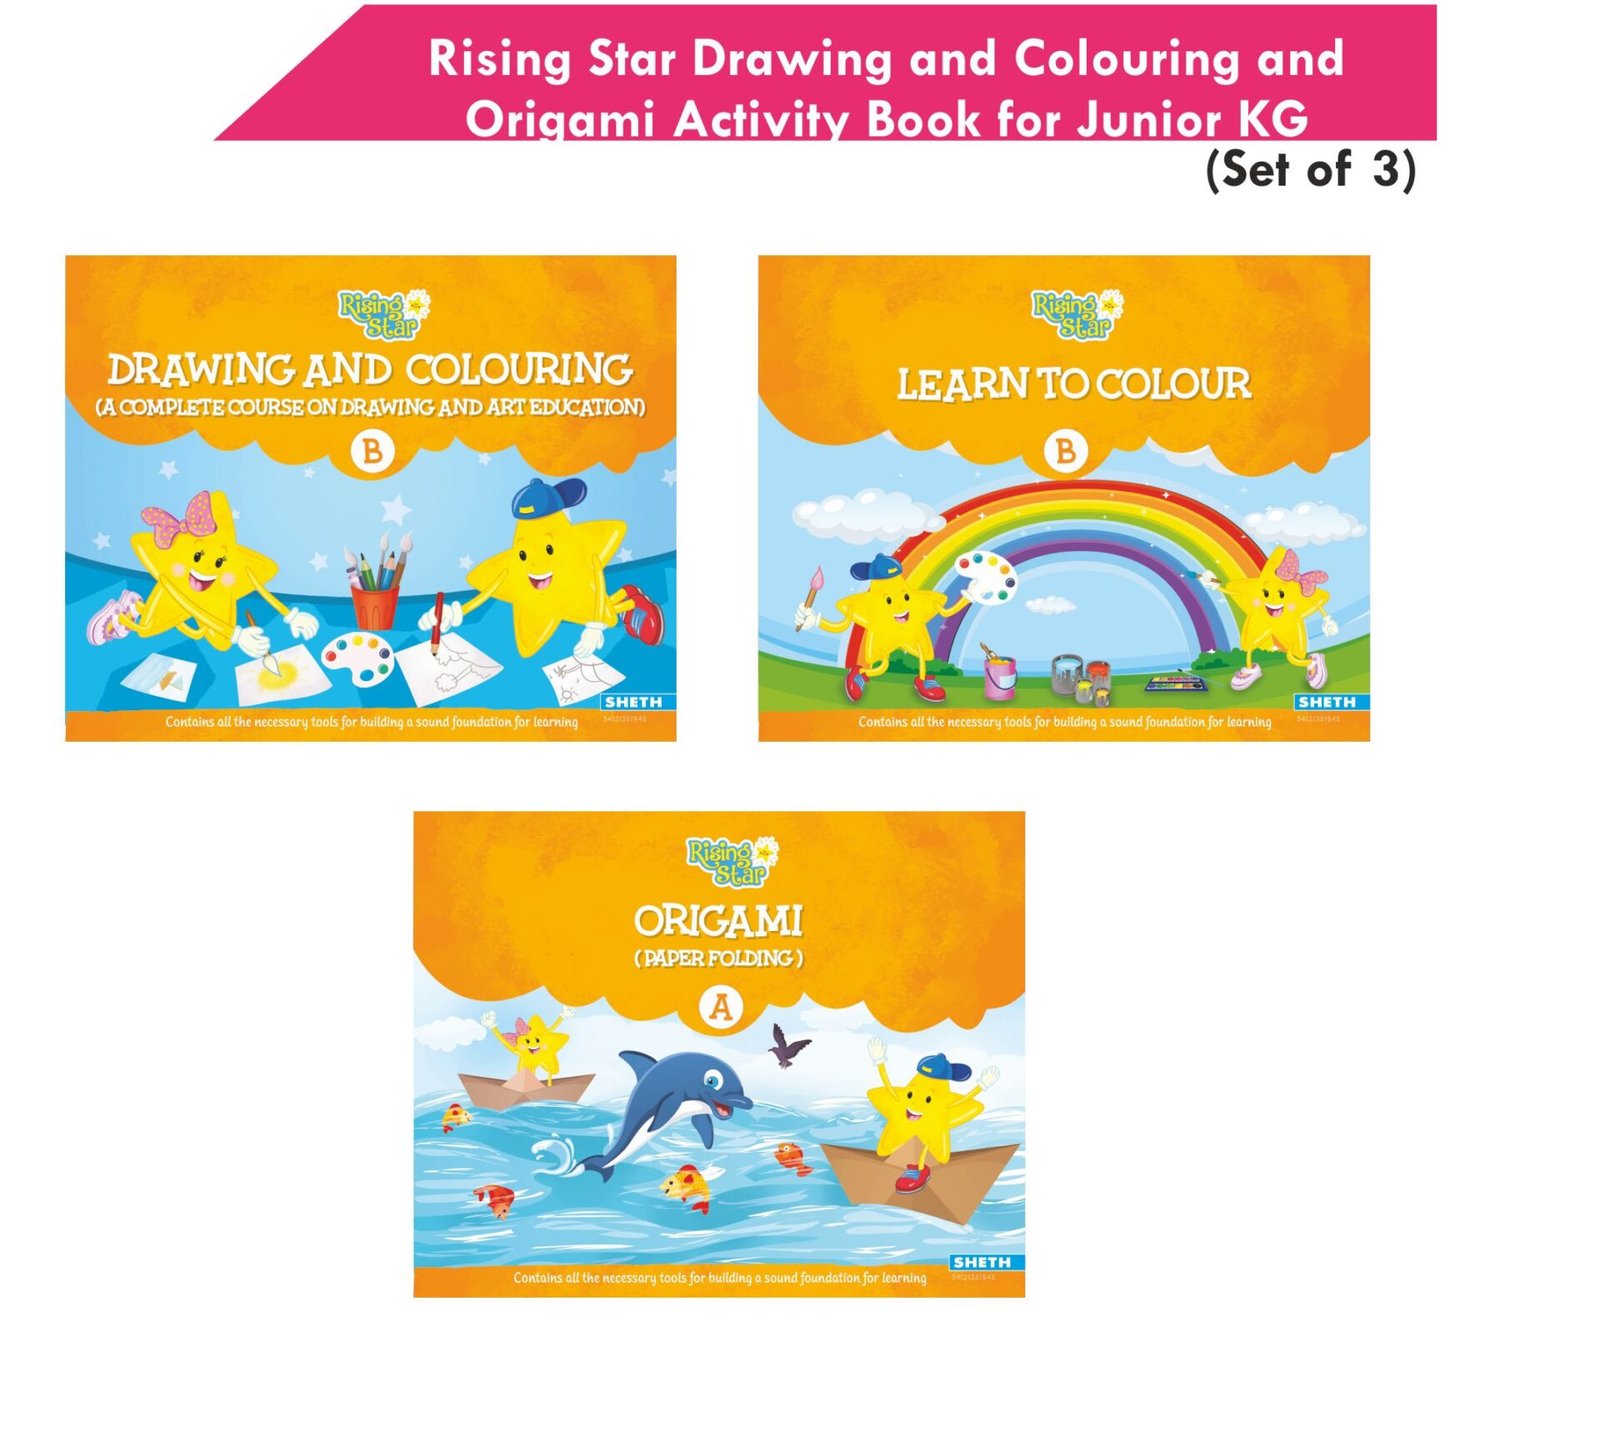 Rising Star Drawing and Colouring and Origami Activity Book for Junior KG Set of 3 1